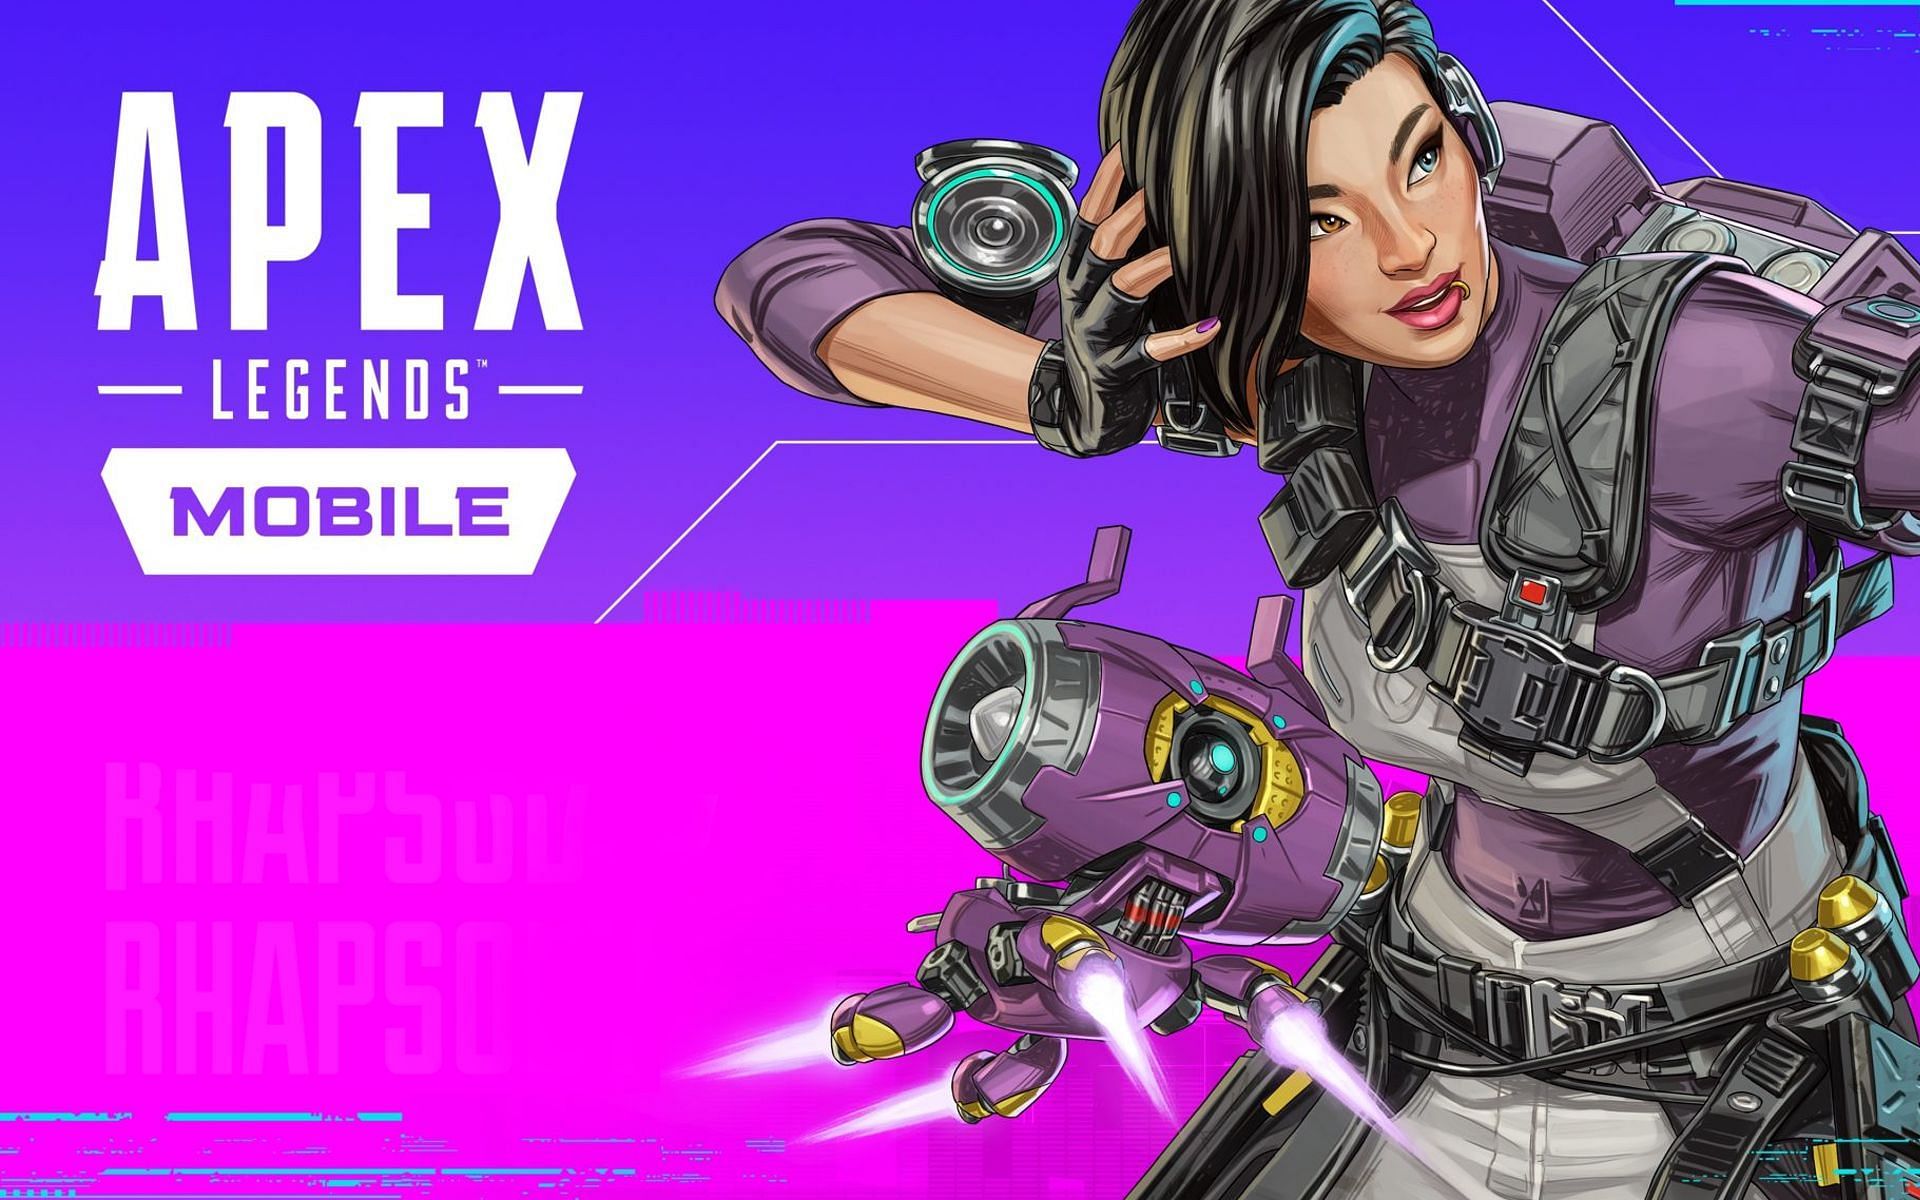 Rhapsody is a mobile-exclusive Apex Legends Mobile character (Image via EA)